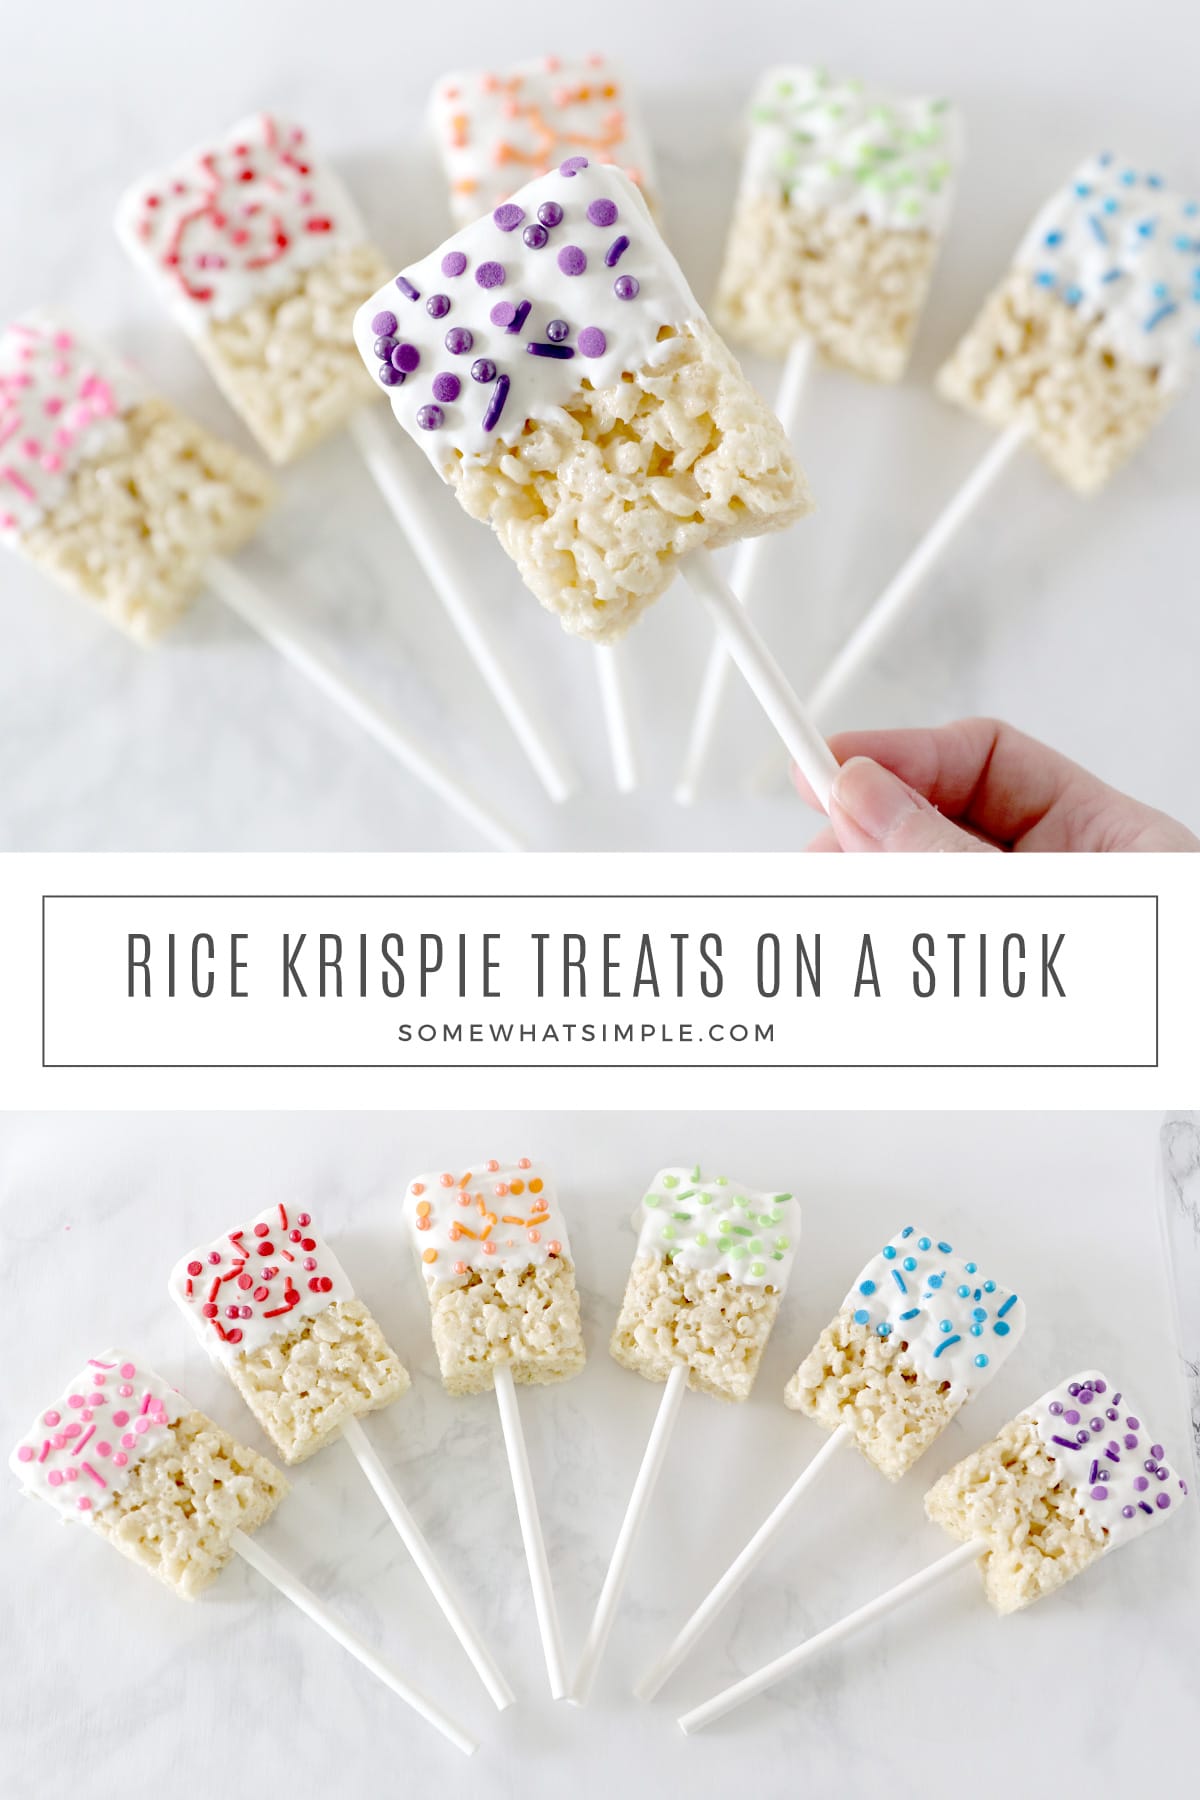 Rice Krispie Treats on a Stick are a fun little treat that are so simple to make! Mix up the toppings to match any celebration for a handheld treat that tastes delicious! via @somewhatsimple